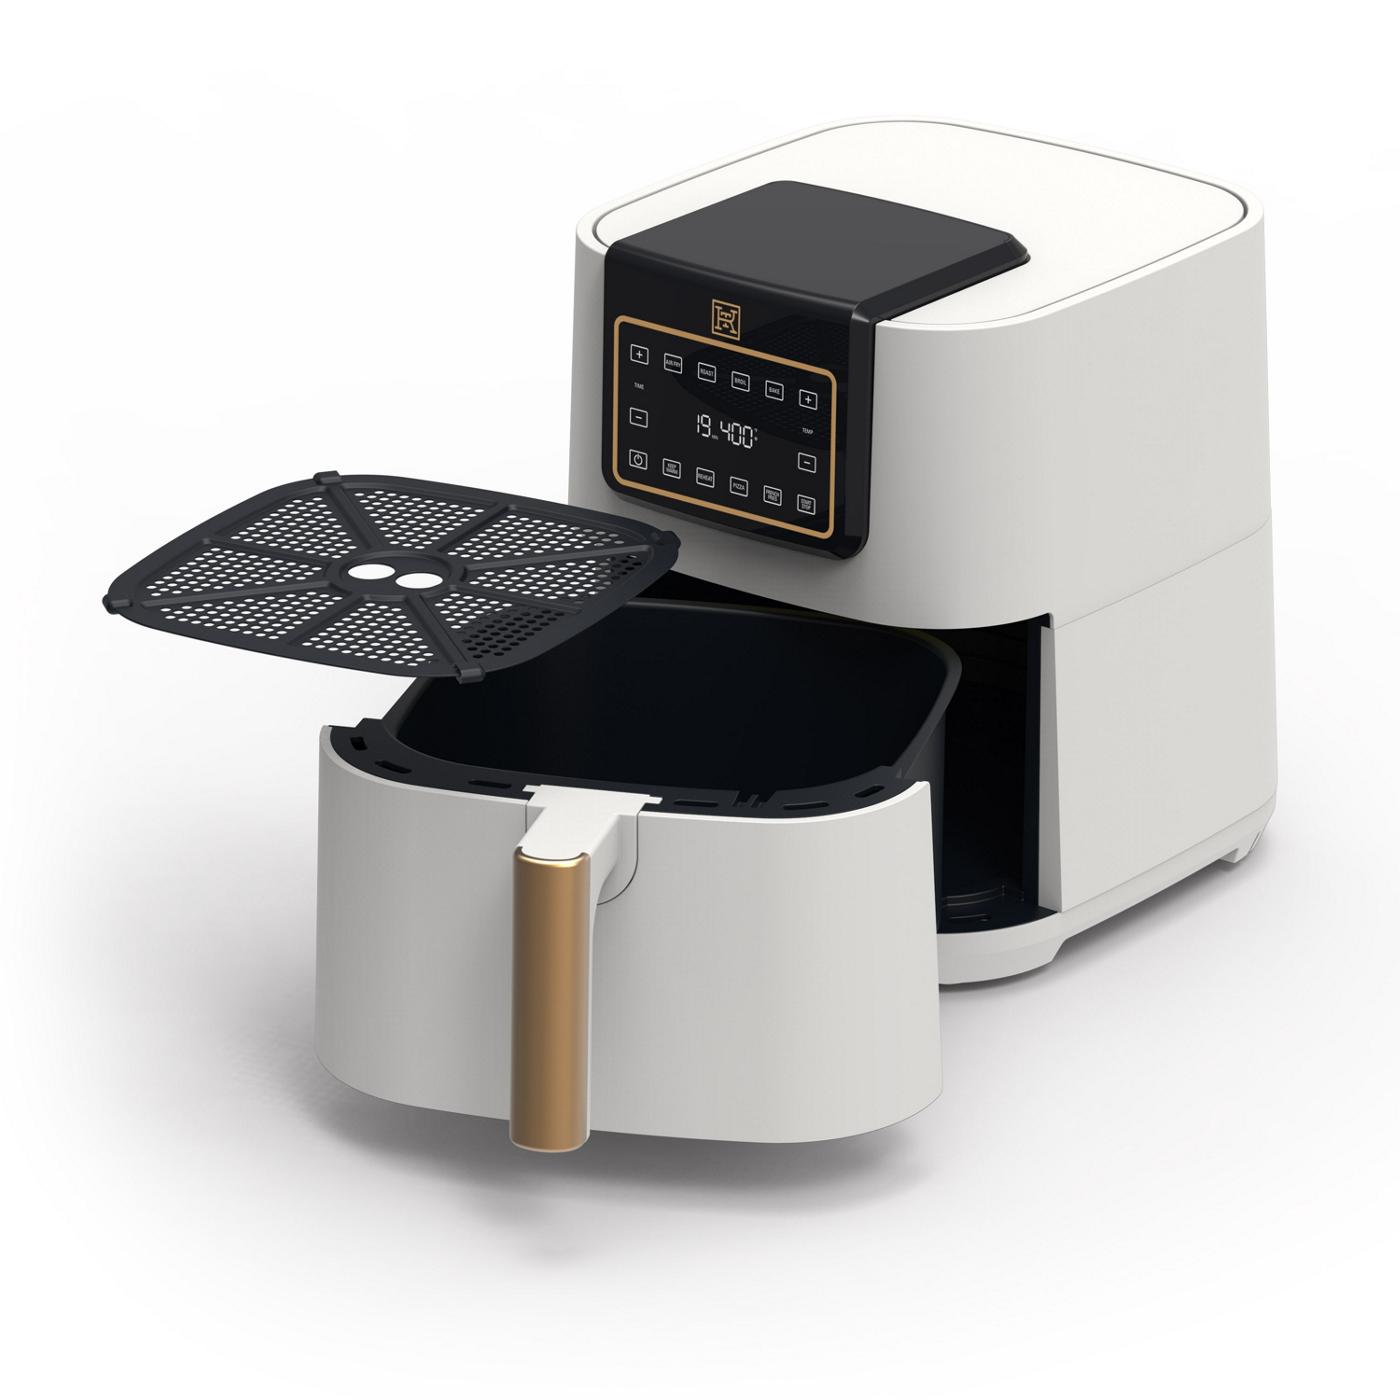 Kitchen & Table by H-E-B TriZone Air Fryer - Classic Black - Shop Cookers &  Roasters at H-E-B